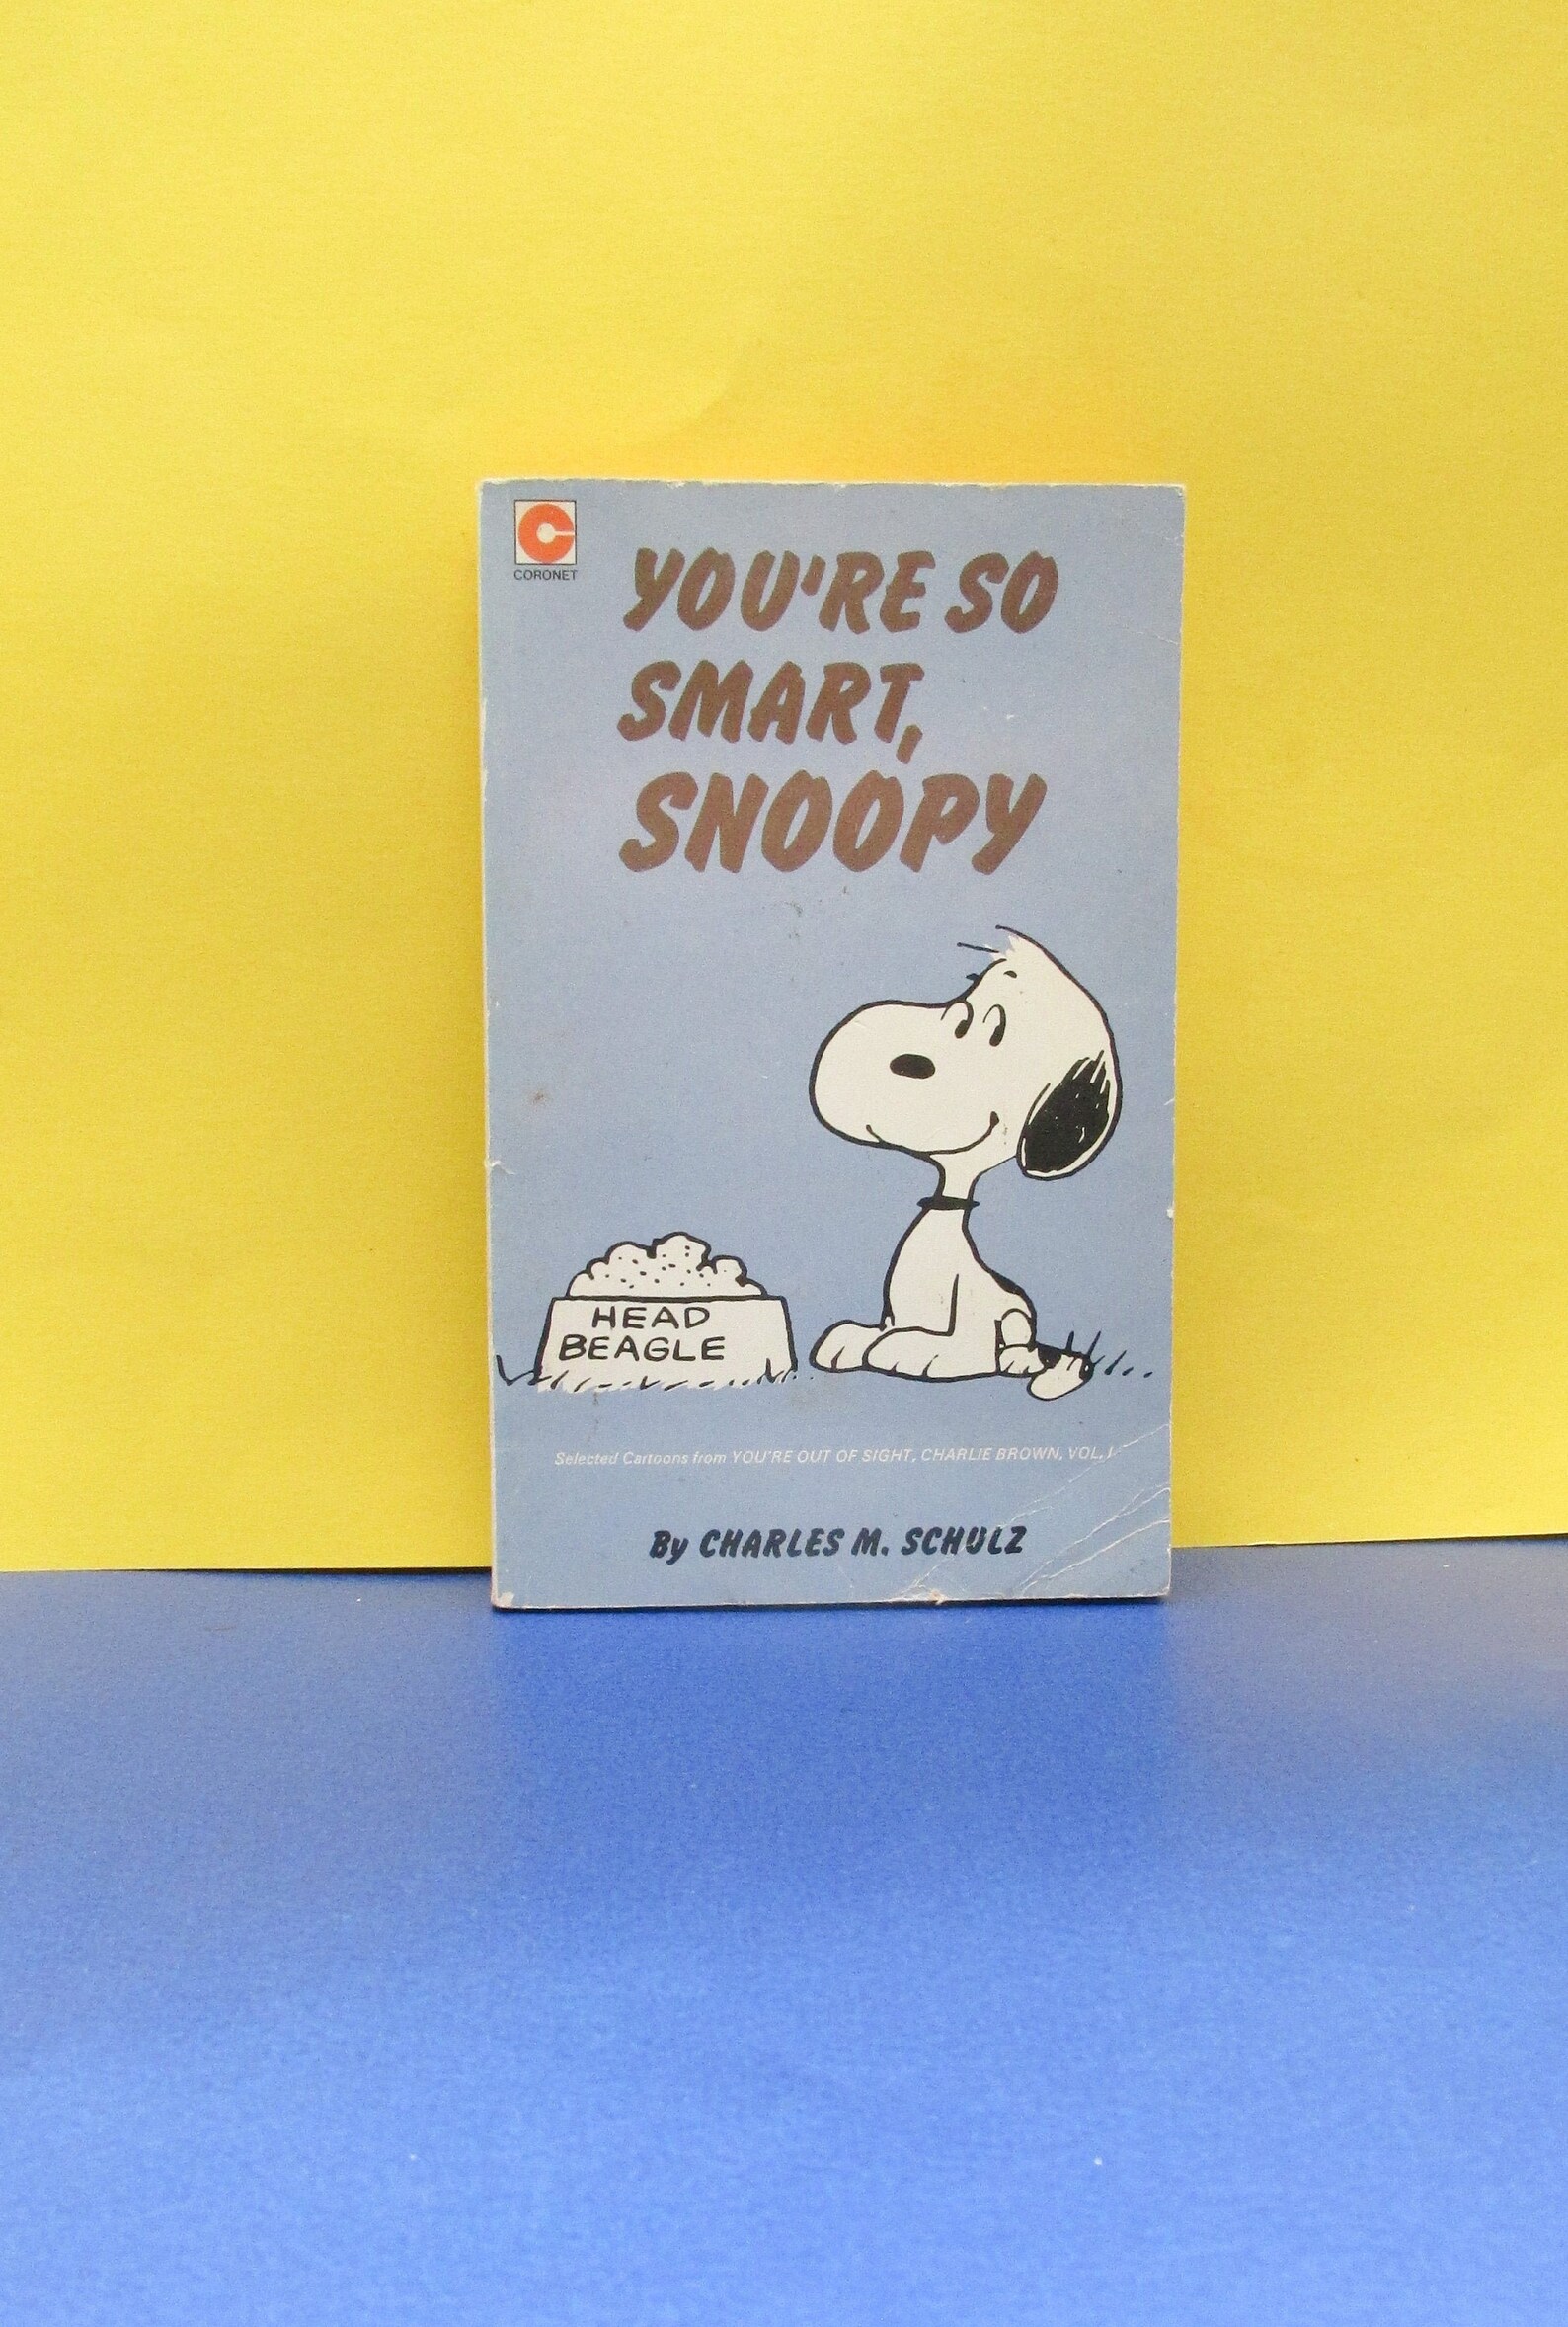 You're So Smart Snoopy by Charles M Schulz | Etsy